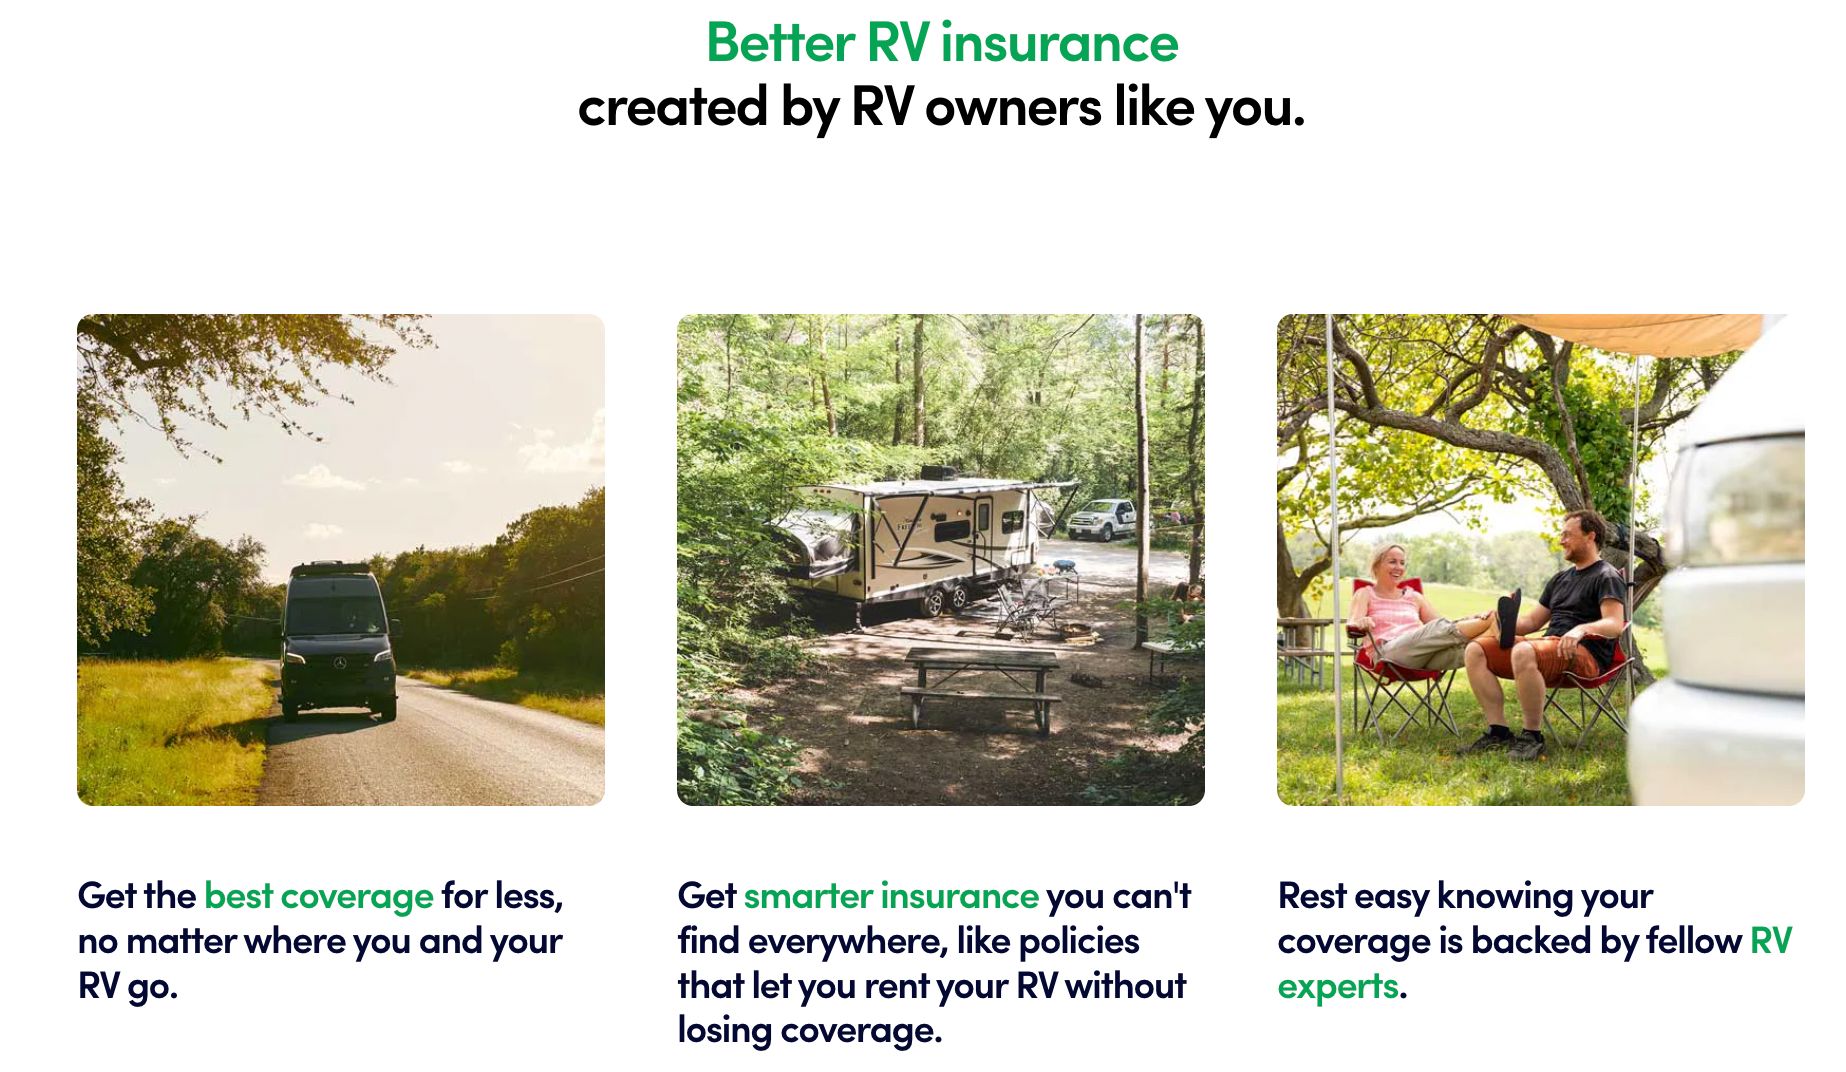 Better RV insurance created by owners like you